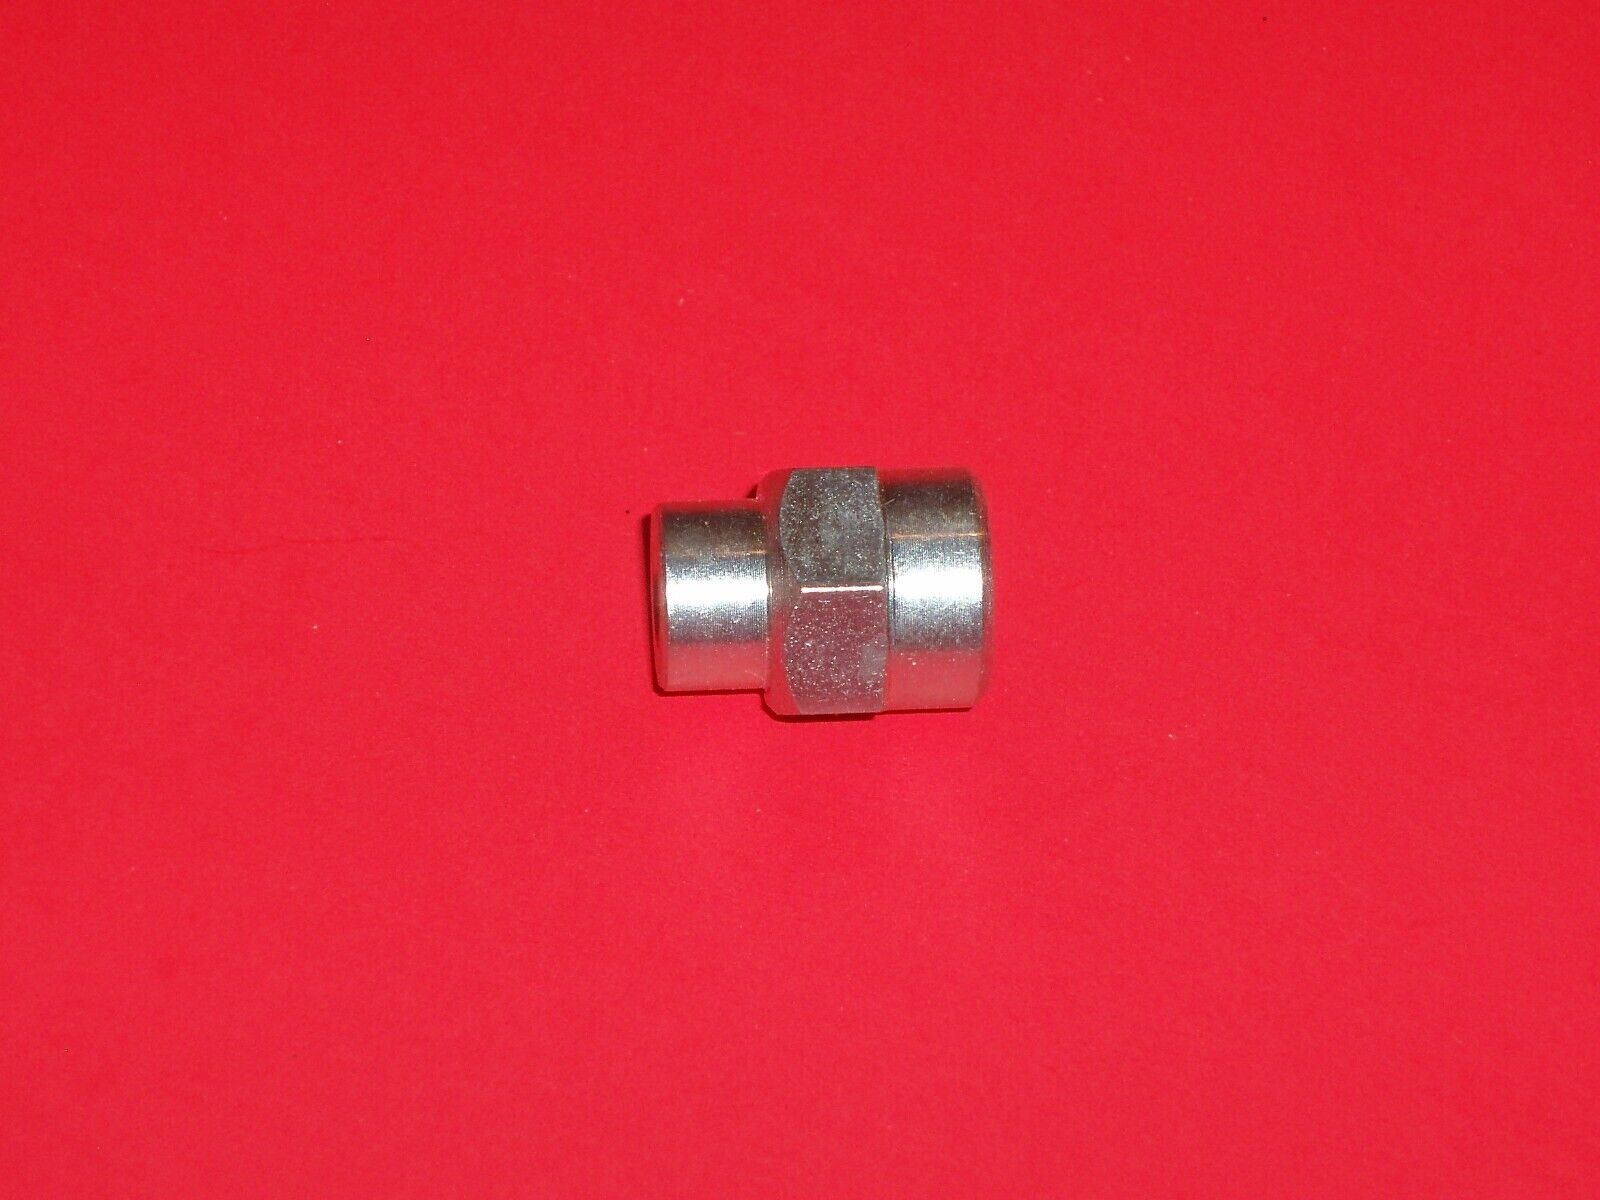 Ford Model T & A early tractor grease fitting adaptor, Modern gun to original